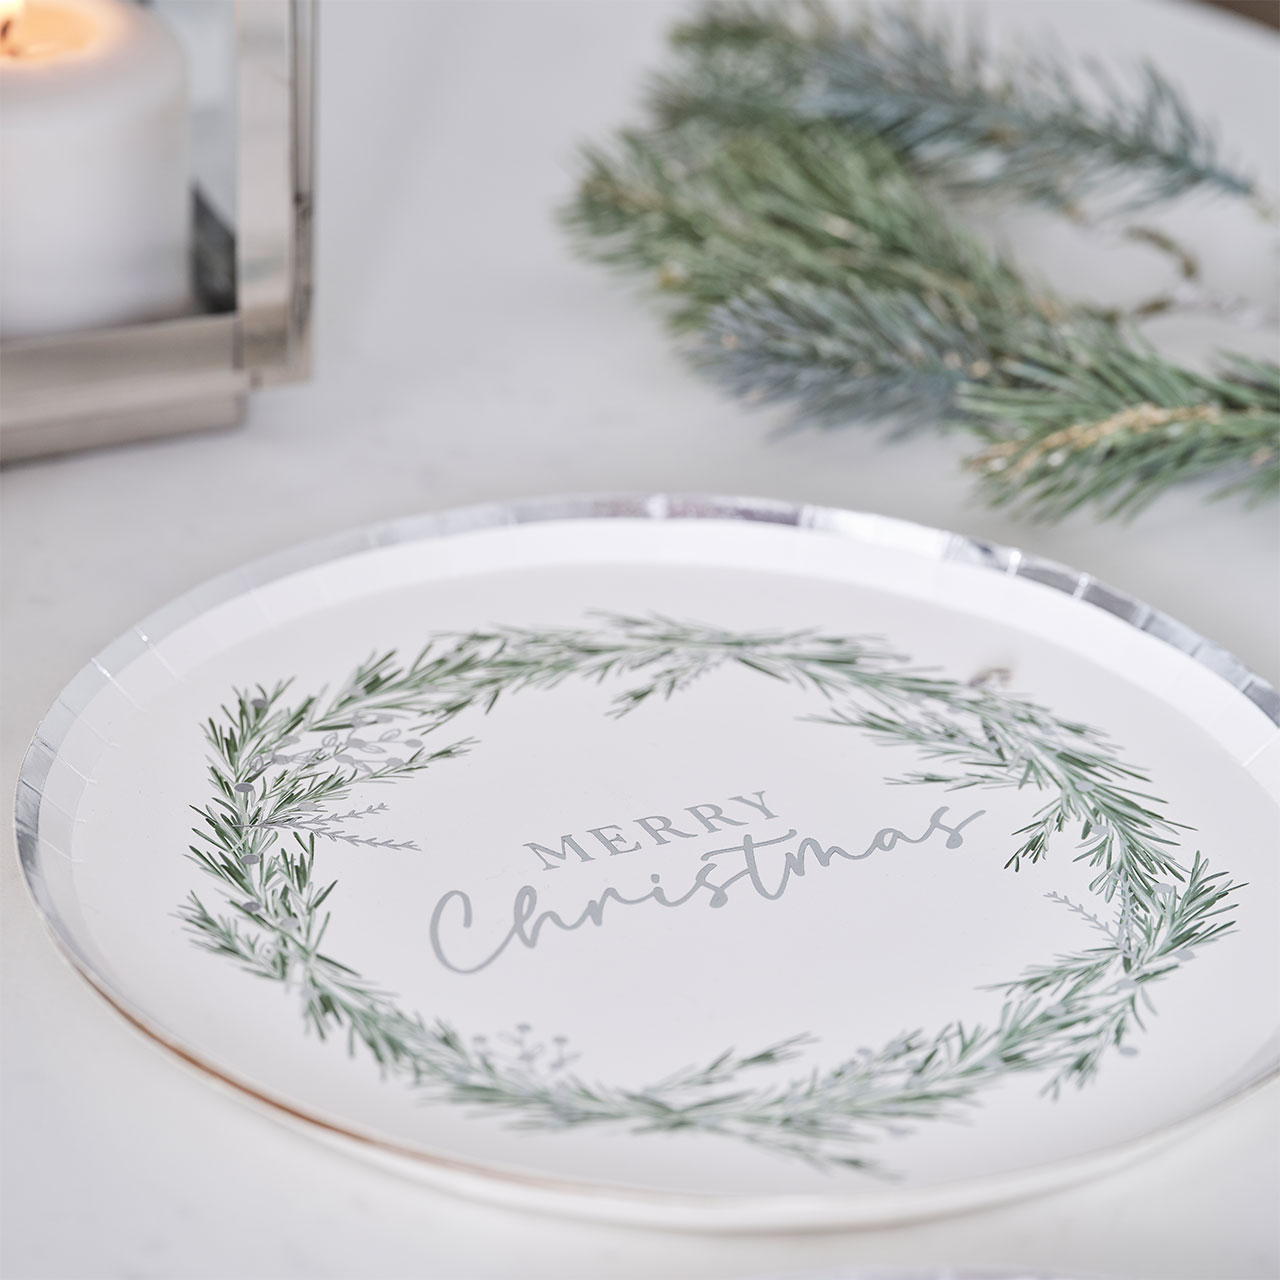 Pappteller - Rustic Silver Merry Christmas